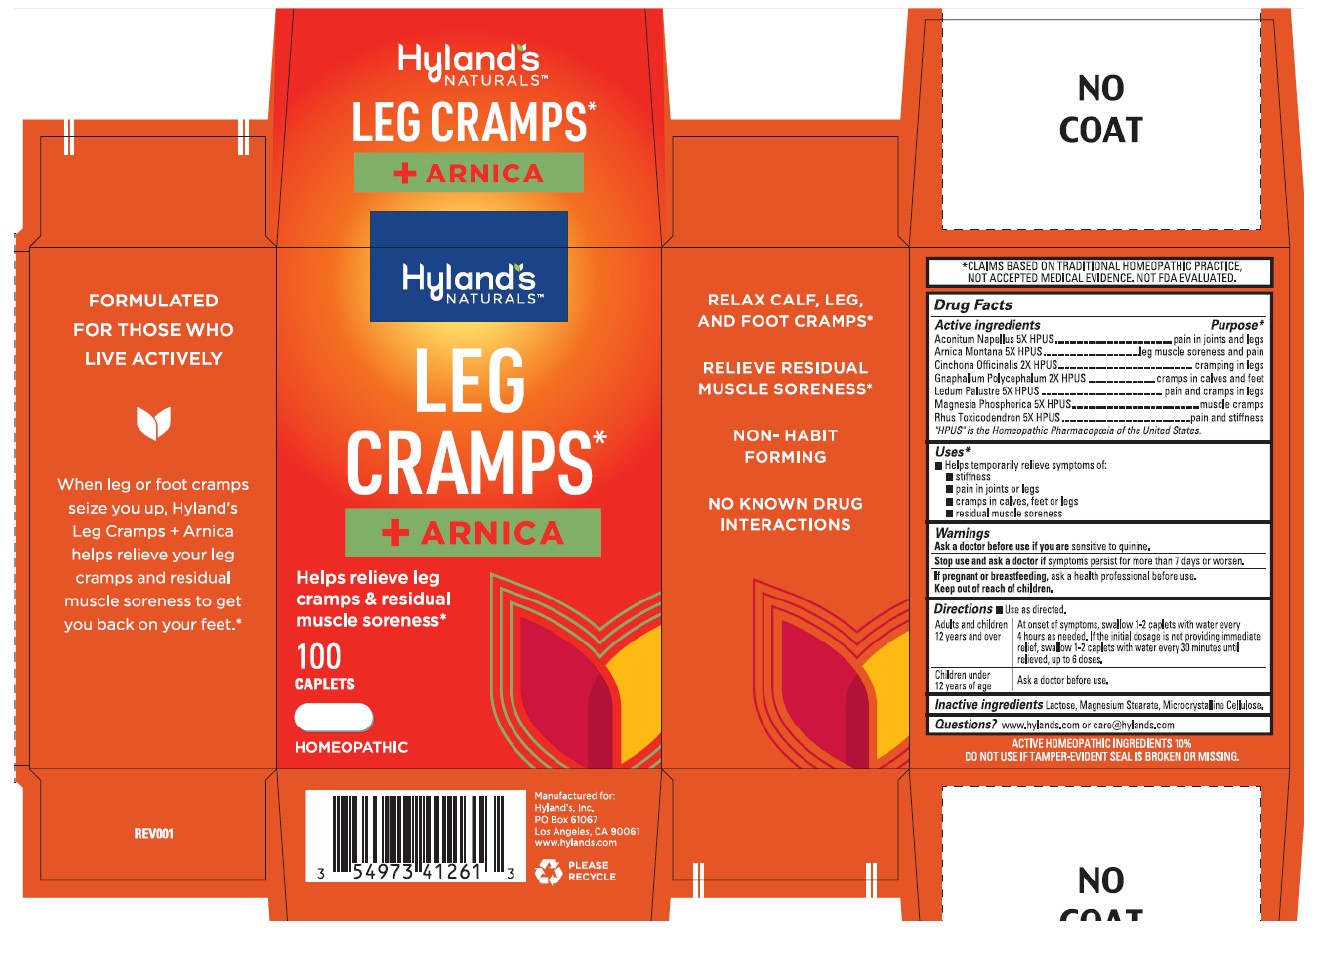 Leg Cramps with Arnica 100 count